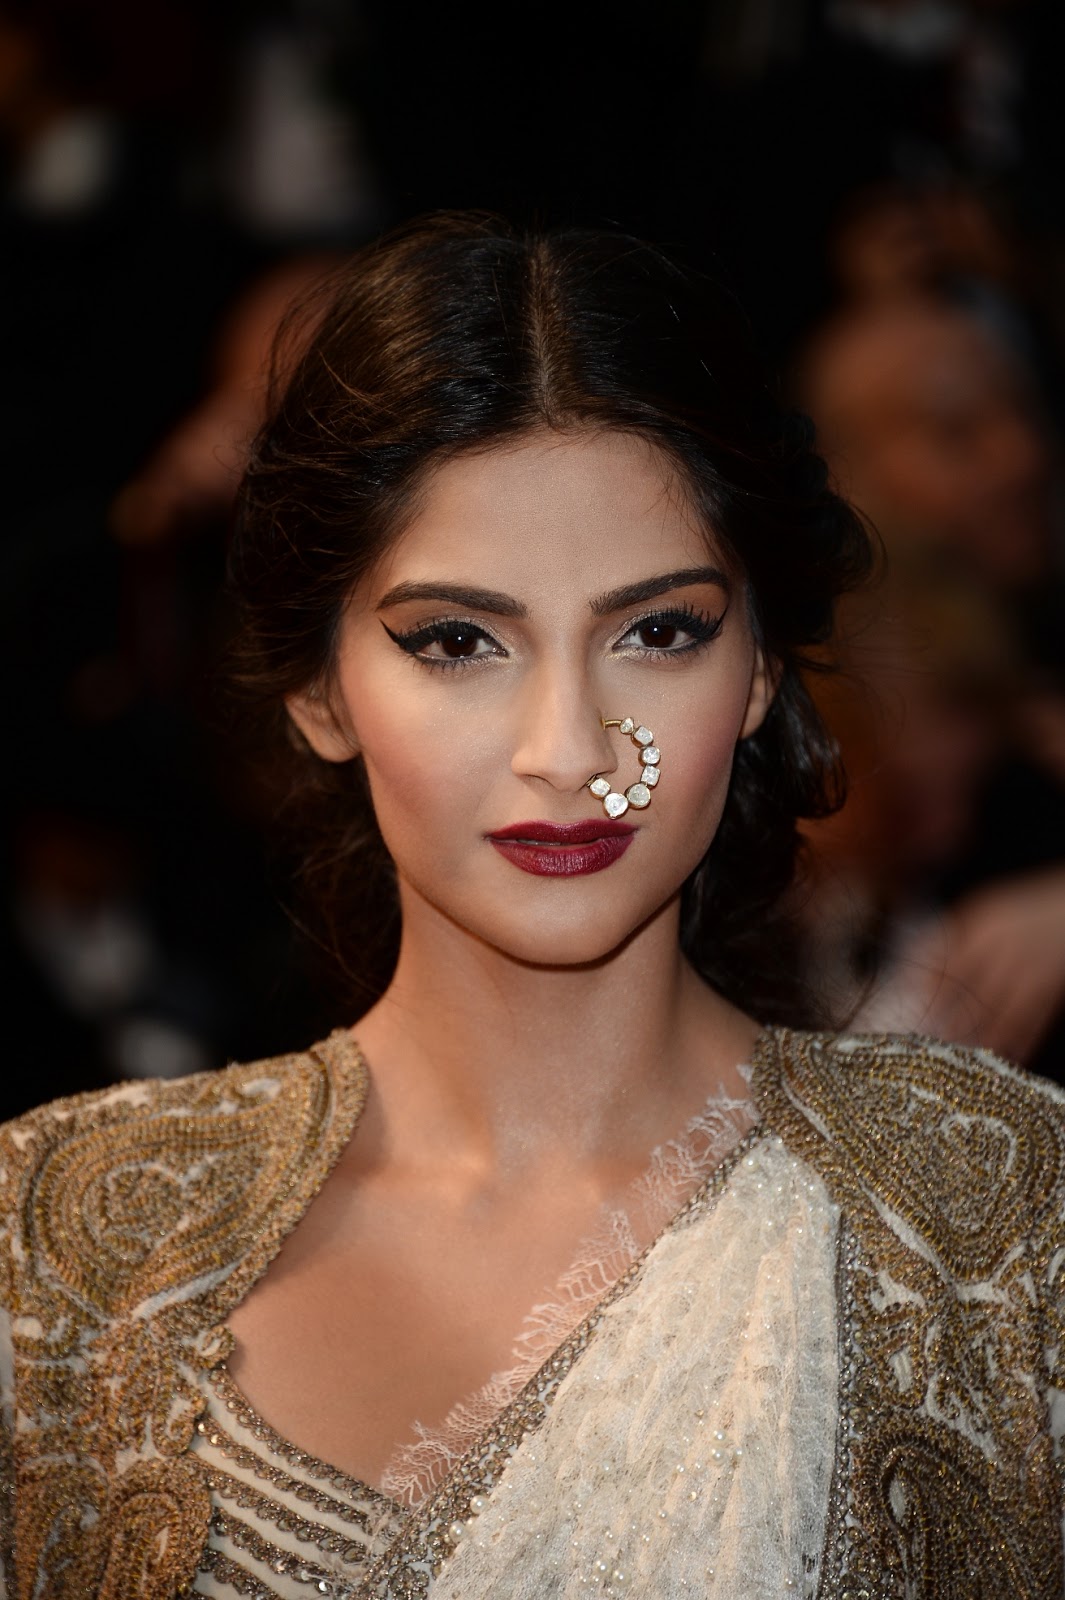 Sonam Kapoor Look Stunning In Anamika Khanna Gold and White Saree At The  Opening Ceremony Of 66th Cannes Film Festival 2013 | miss mander to you